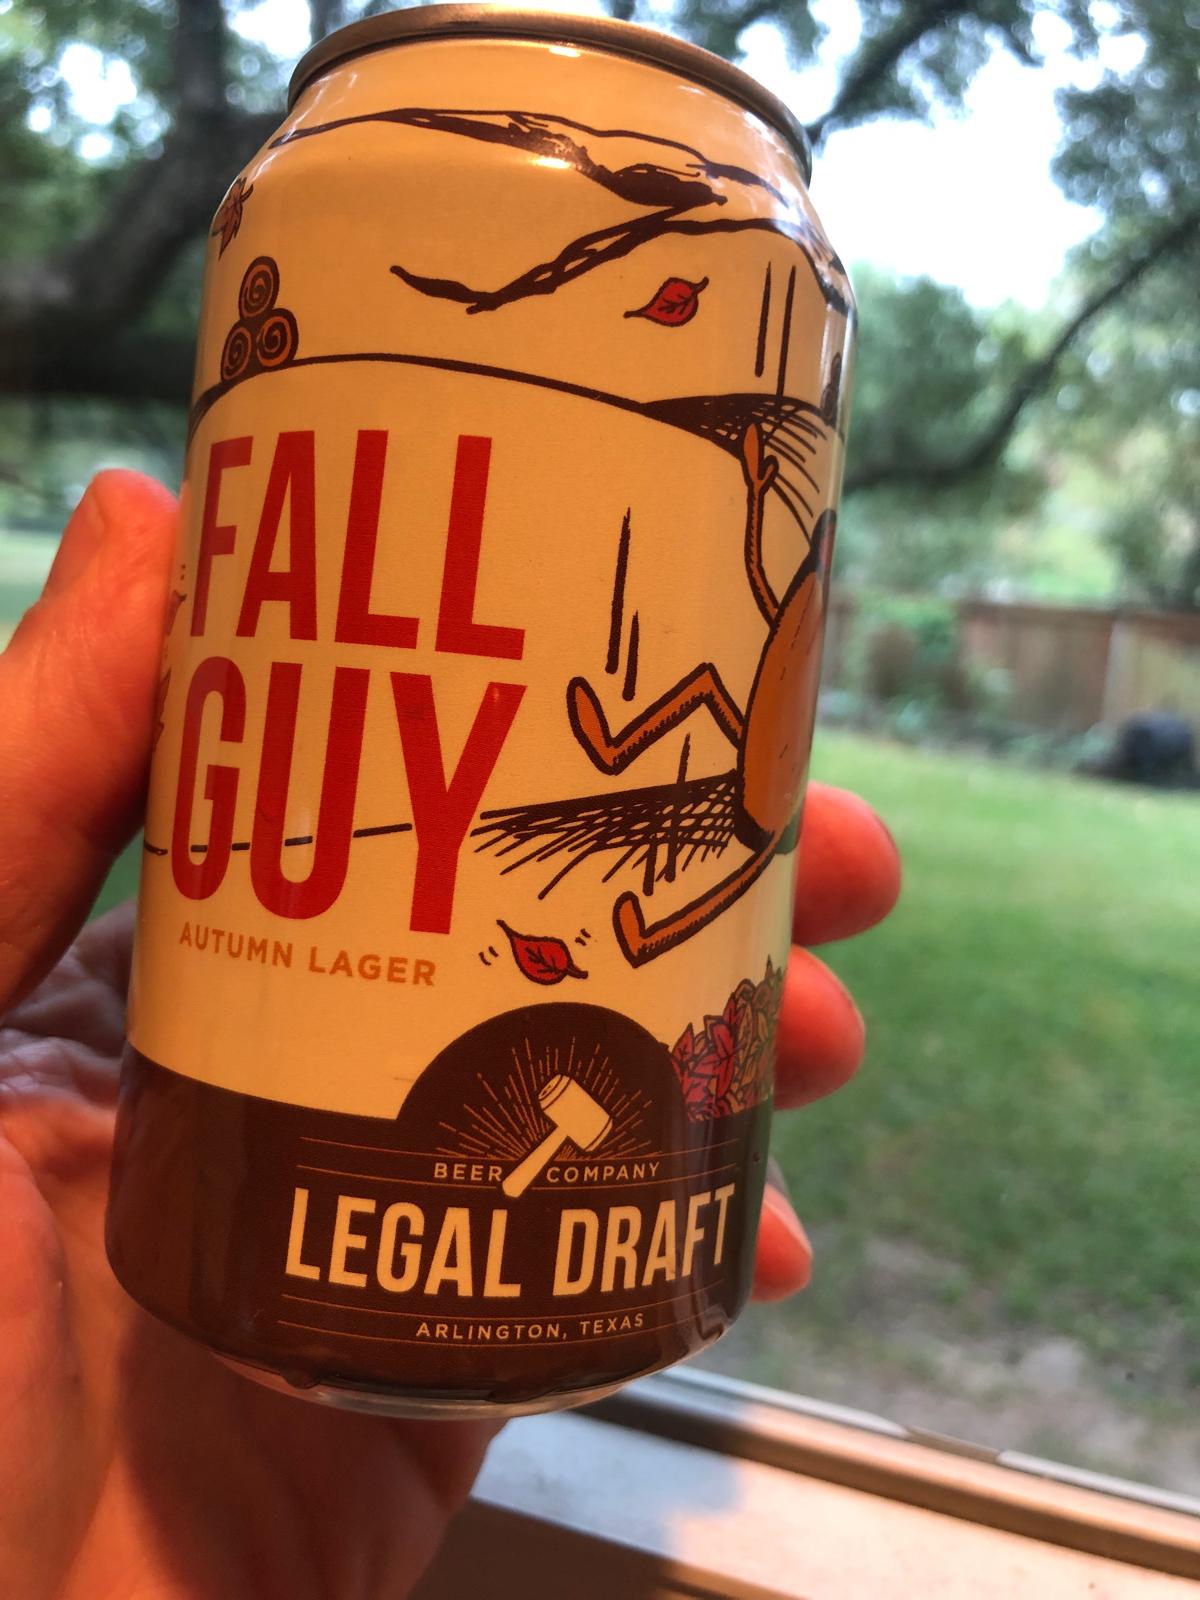 Fall Guy - Autumn Lager